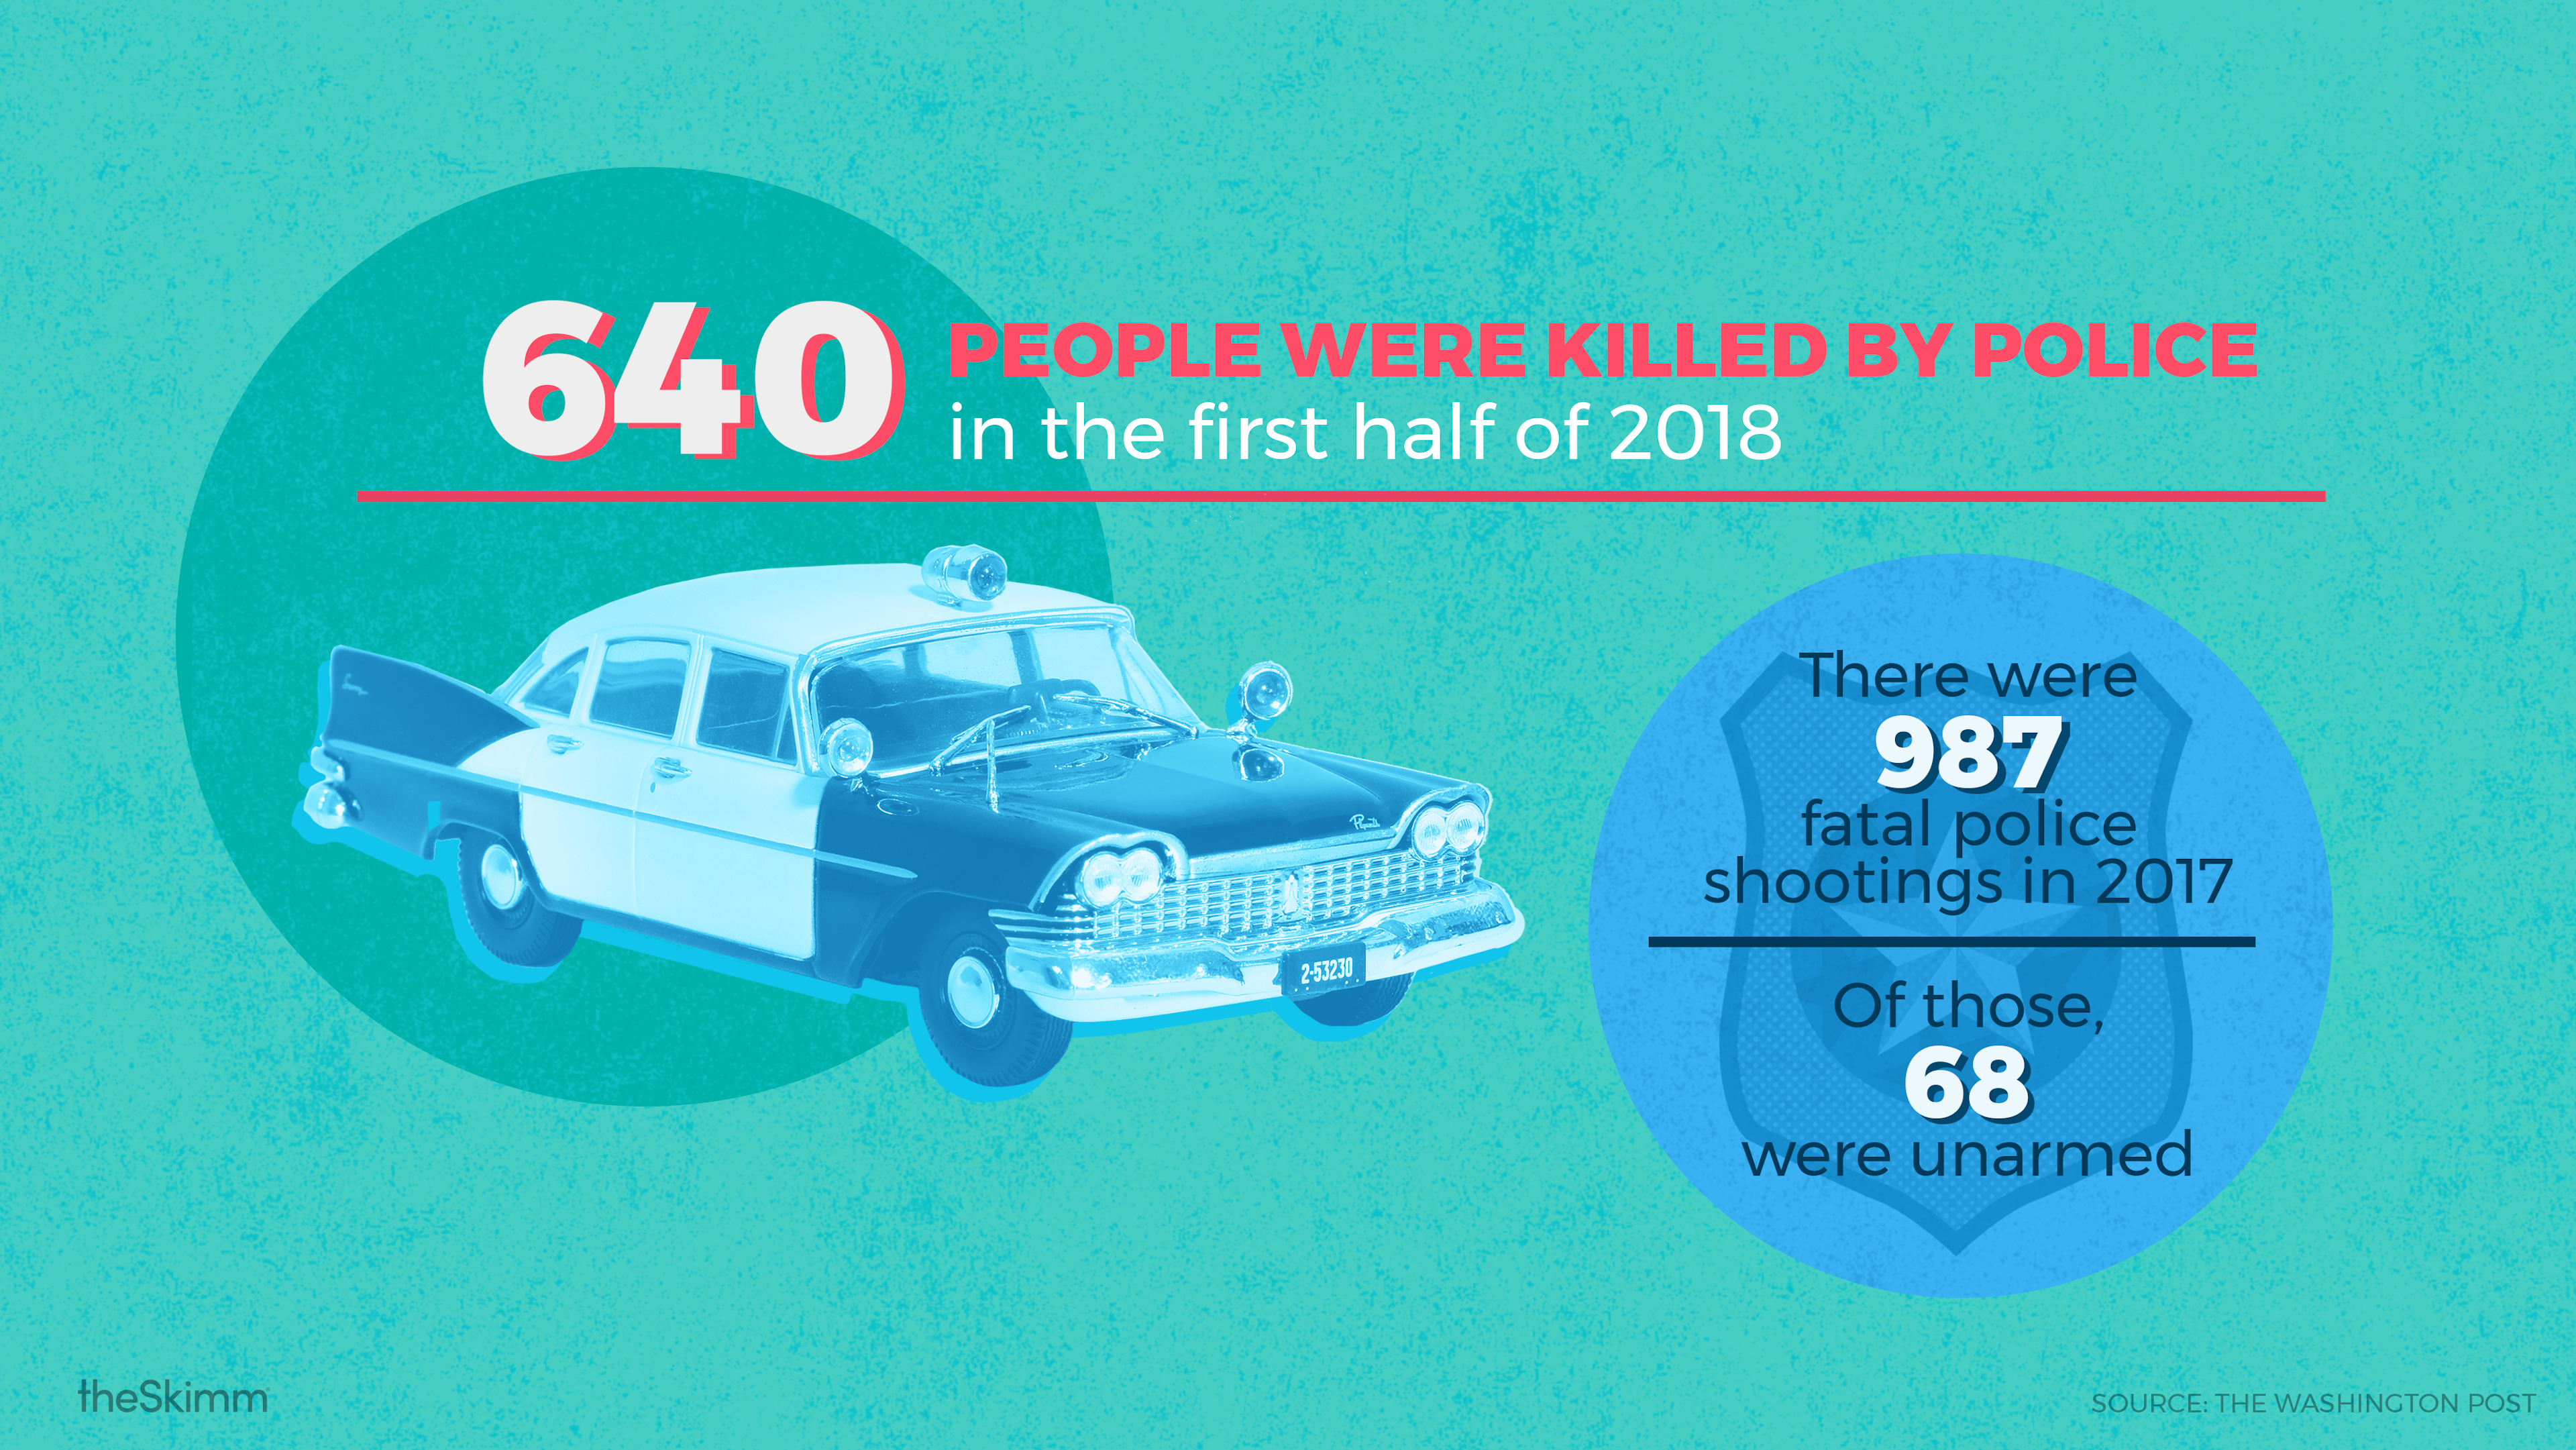 640 people were killed by police in the first half of 2018